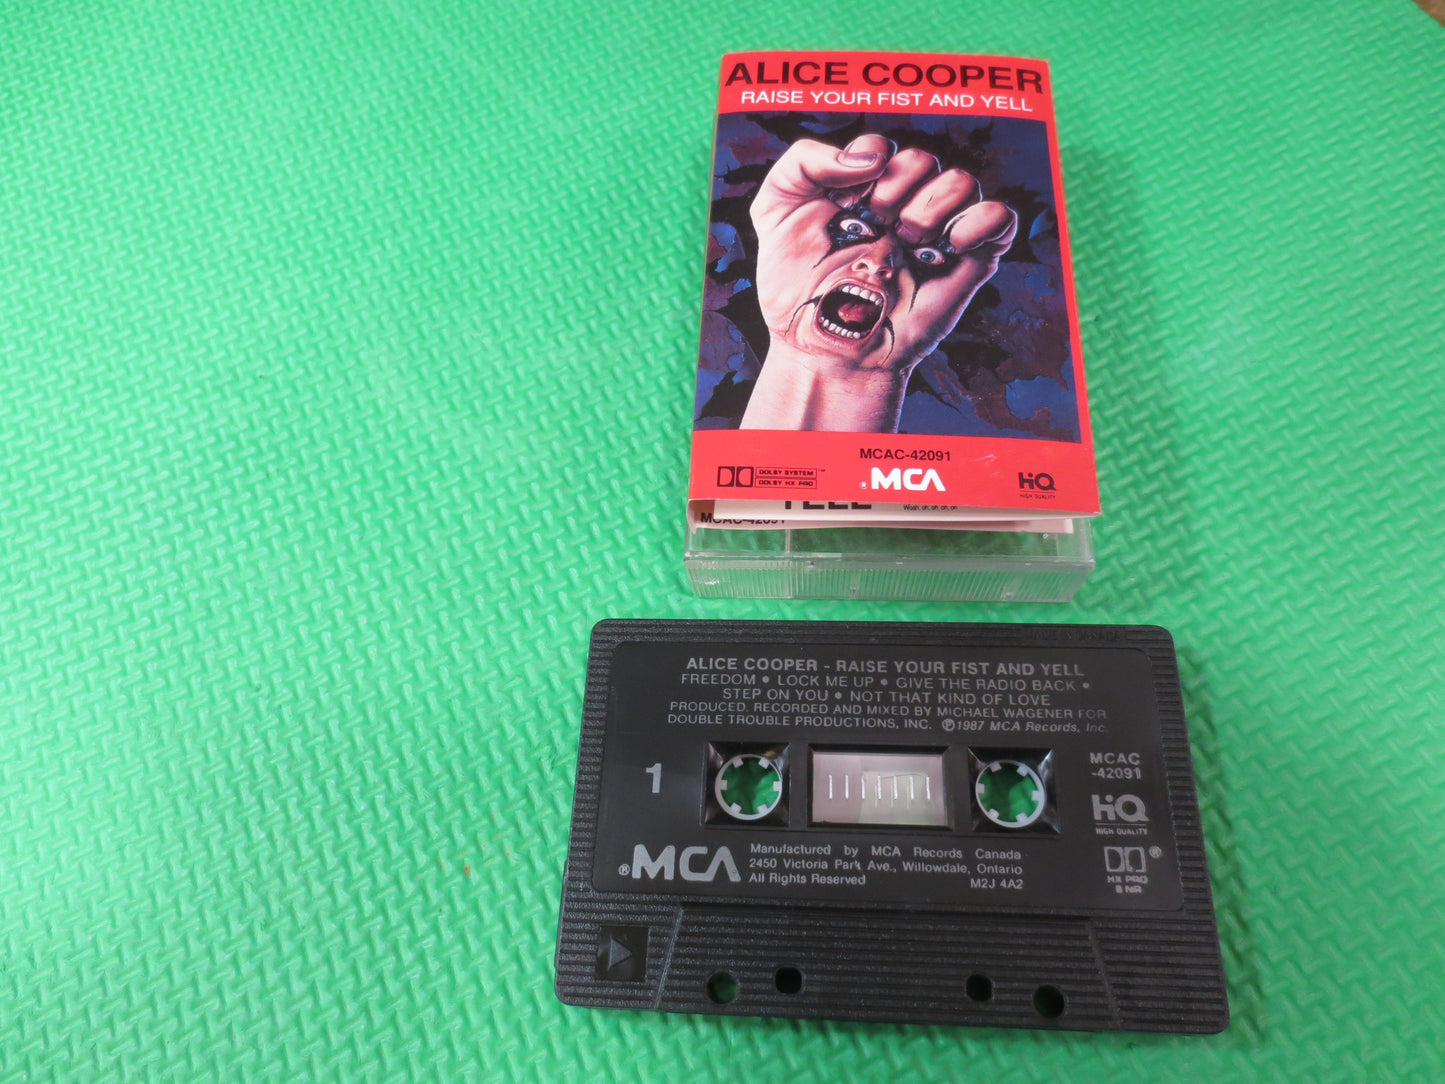 ALICE COOPER Tape, Raise Your FIST and Yell, Alice Cooper Album, Alice Cooper Music, Tape Cassette, Cassette, 1987 Cassette